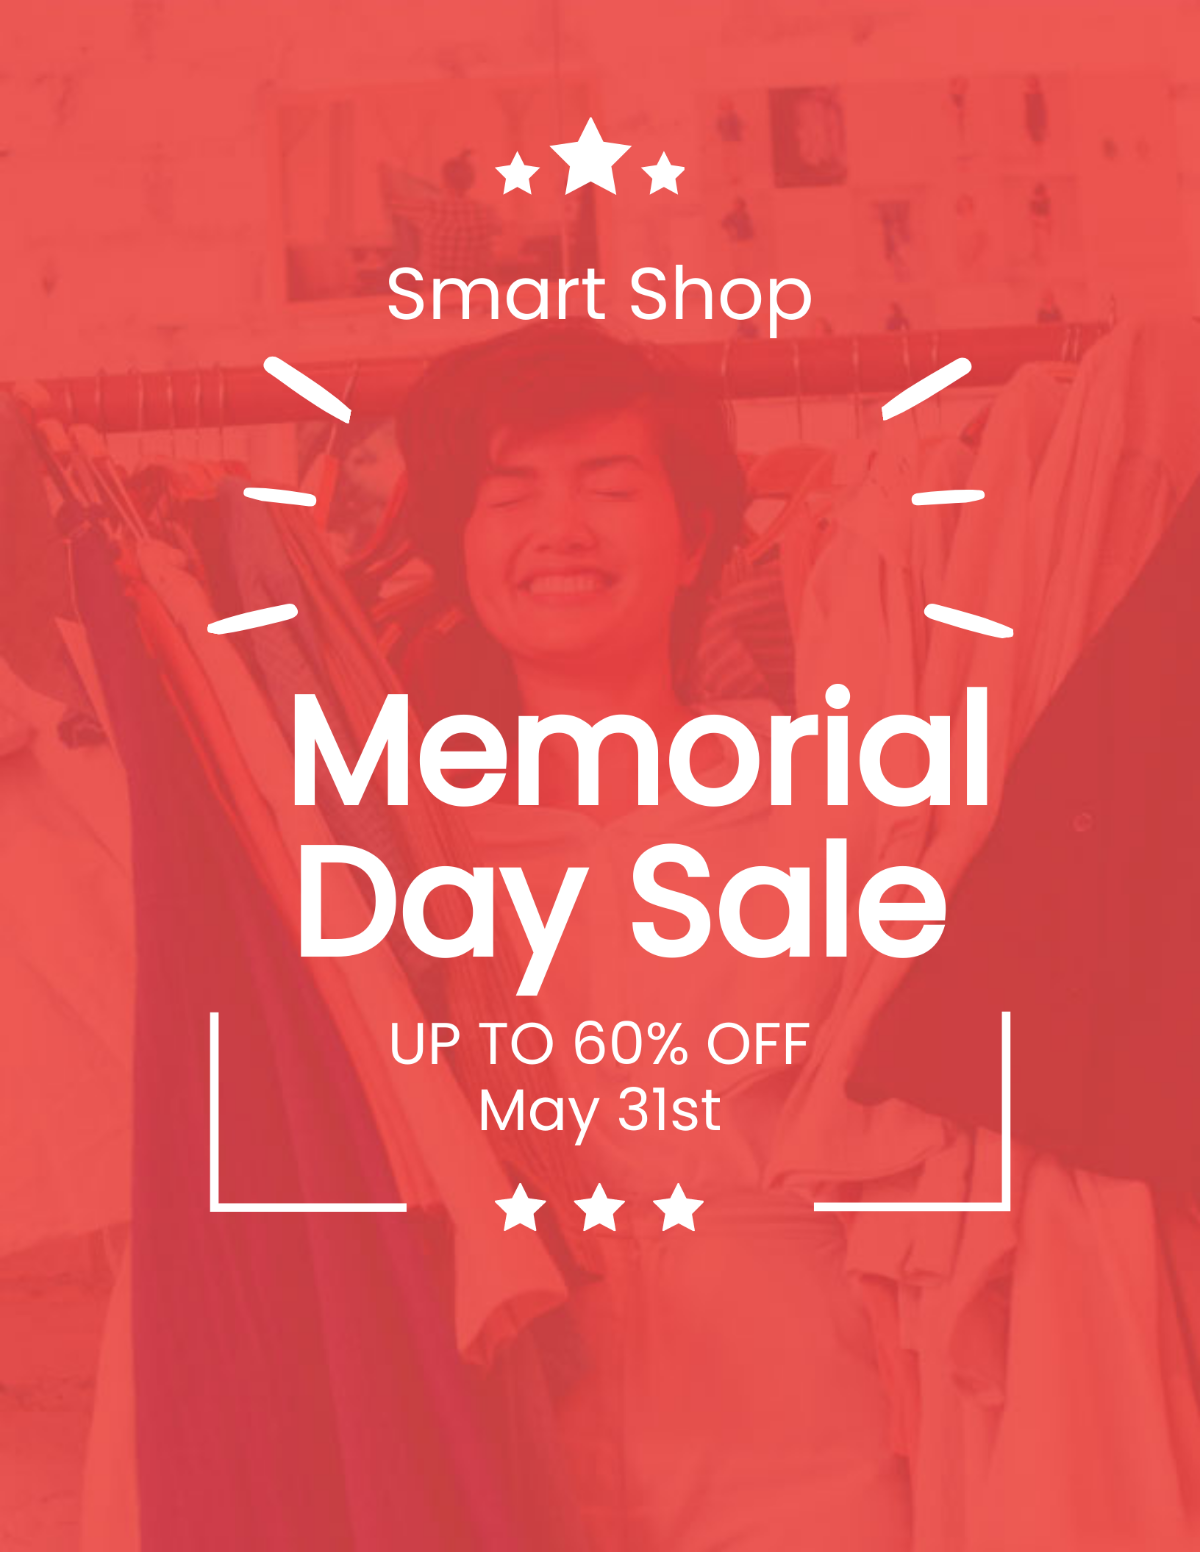 Memorial Day Sale Flyer Template